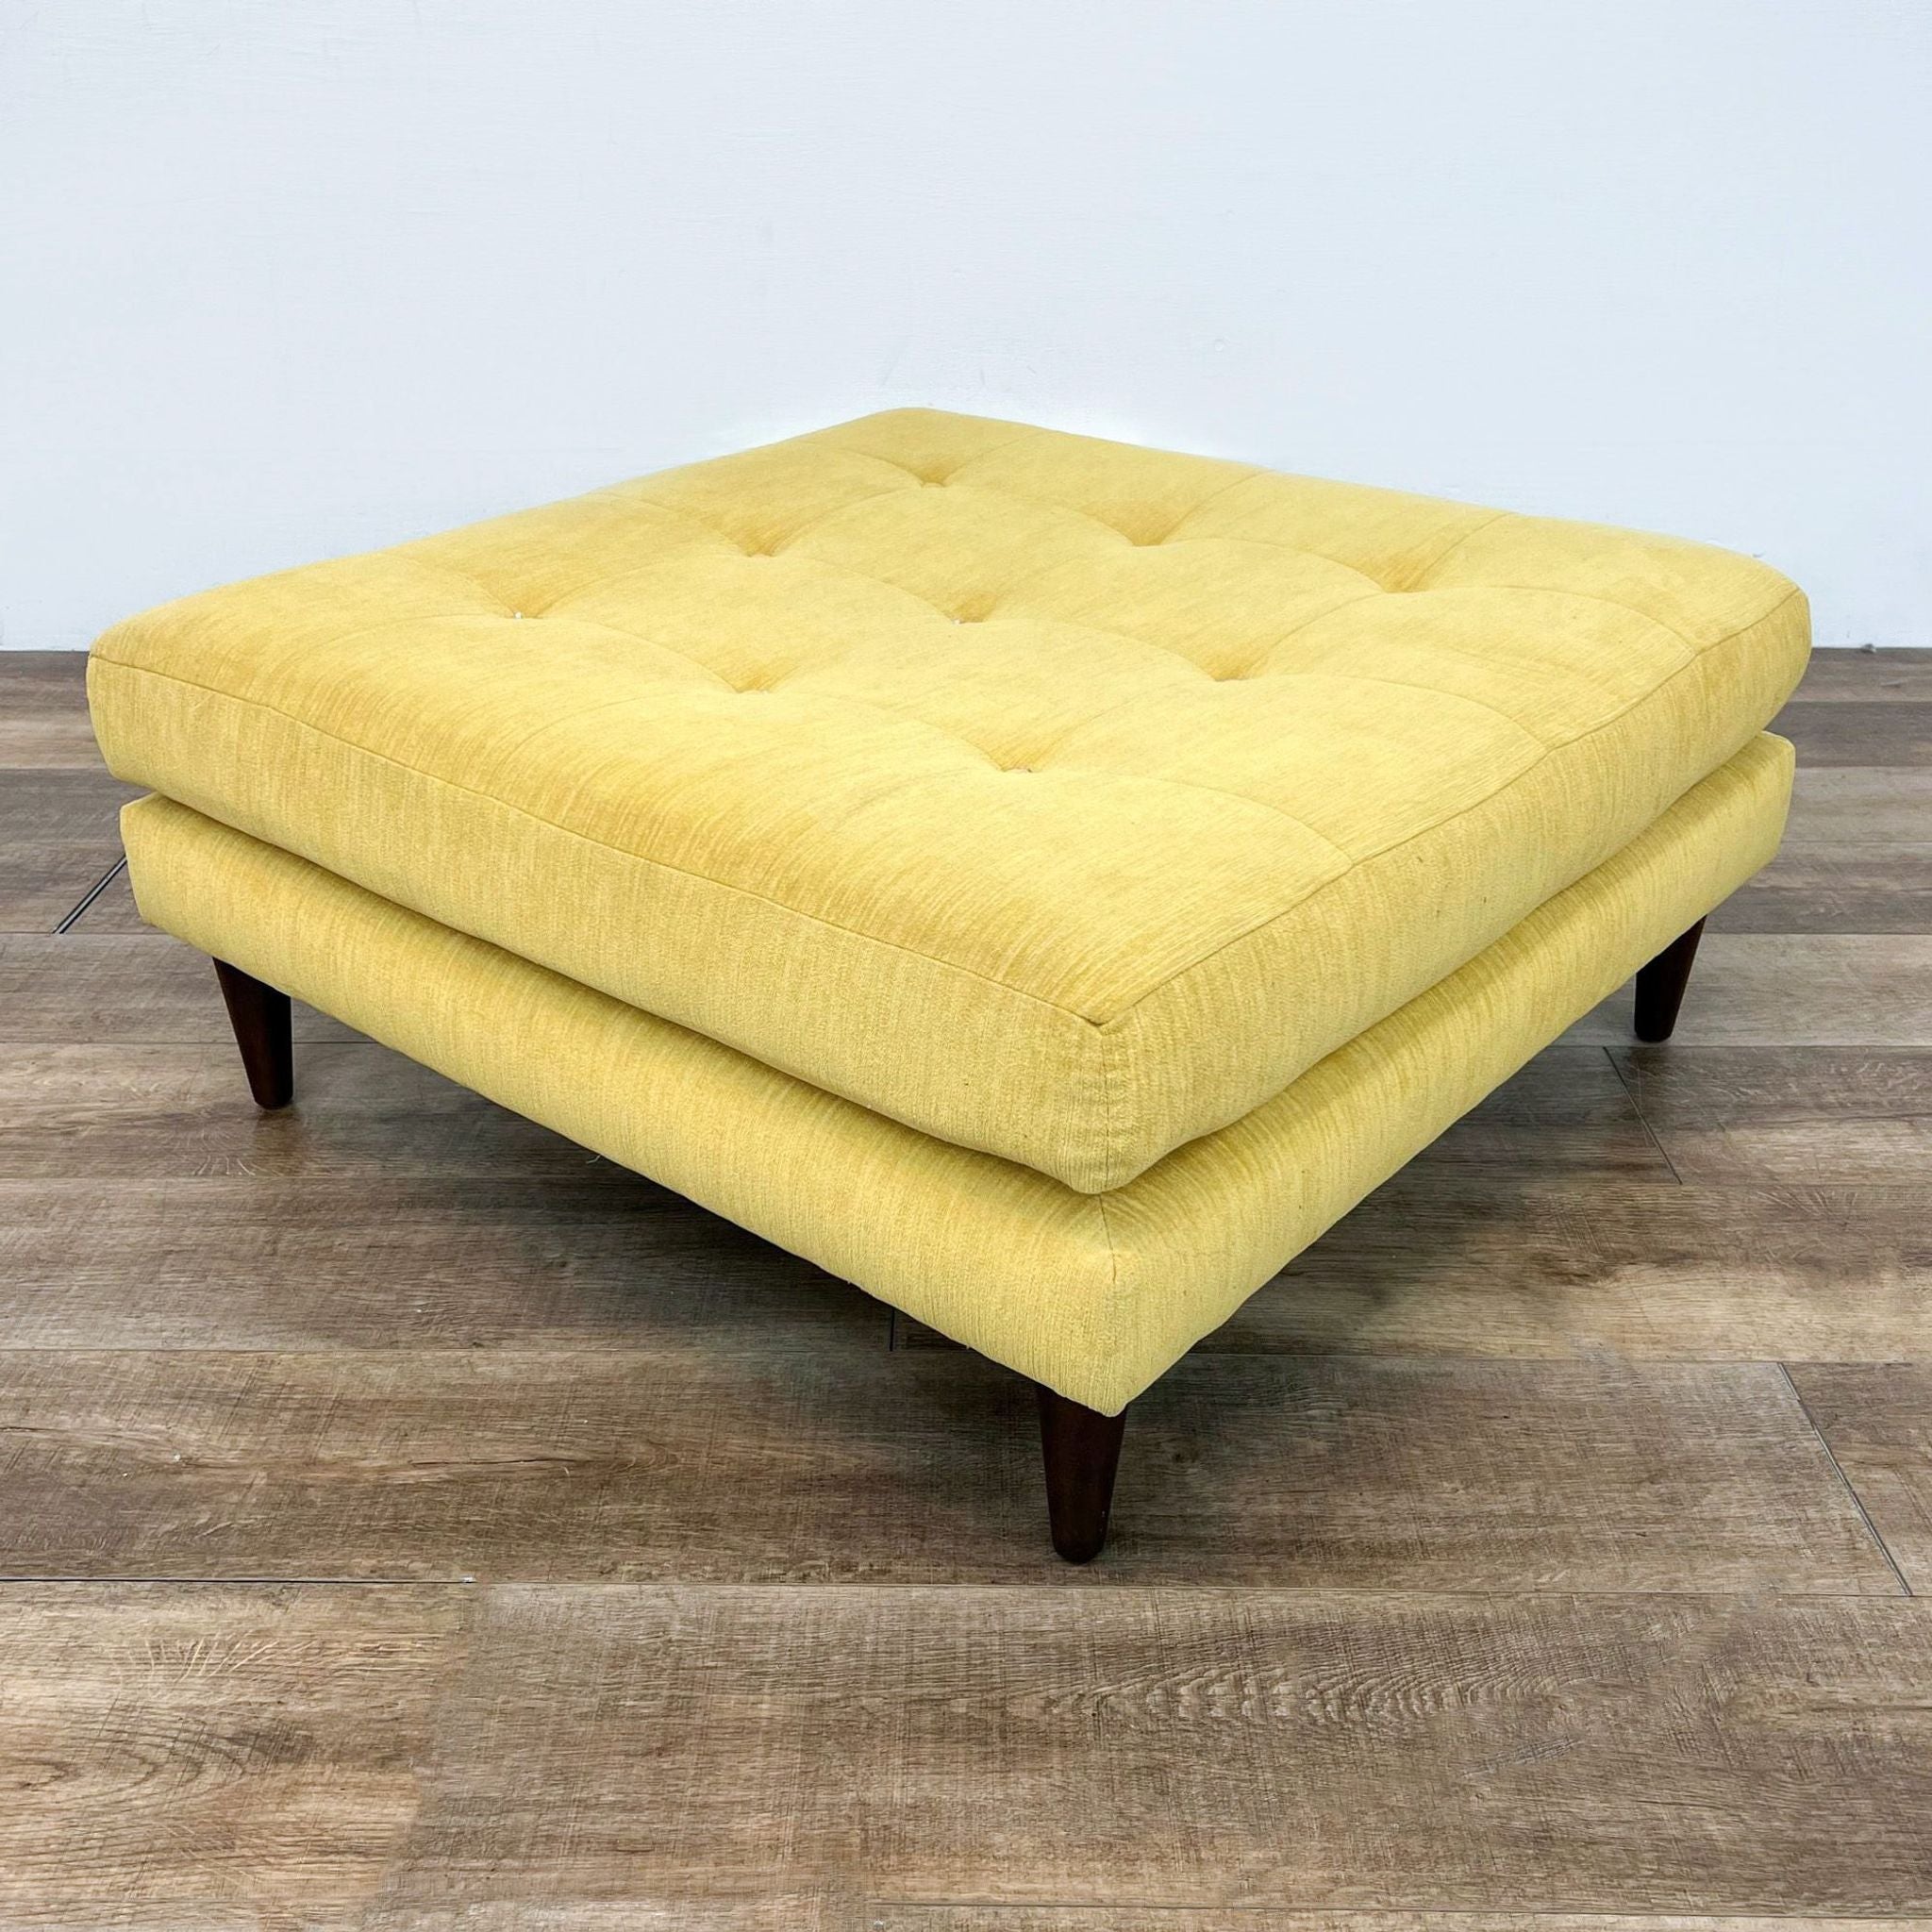 Joybird large square yellow tufted ottoman with tapered wooden feet.